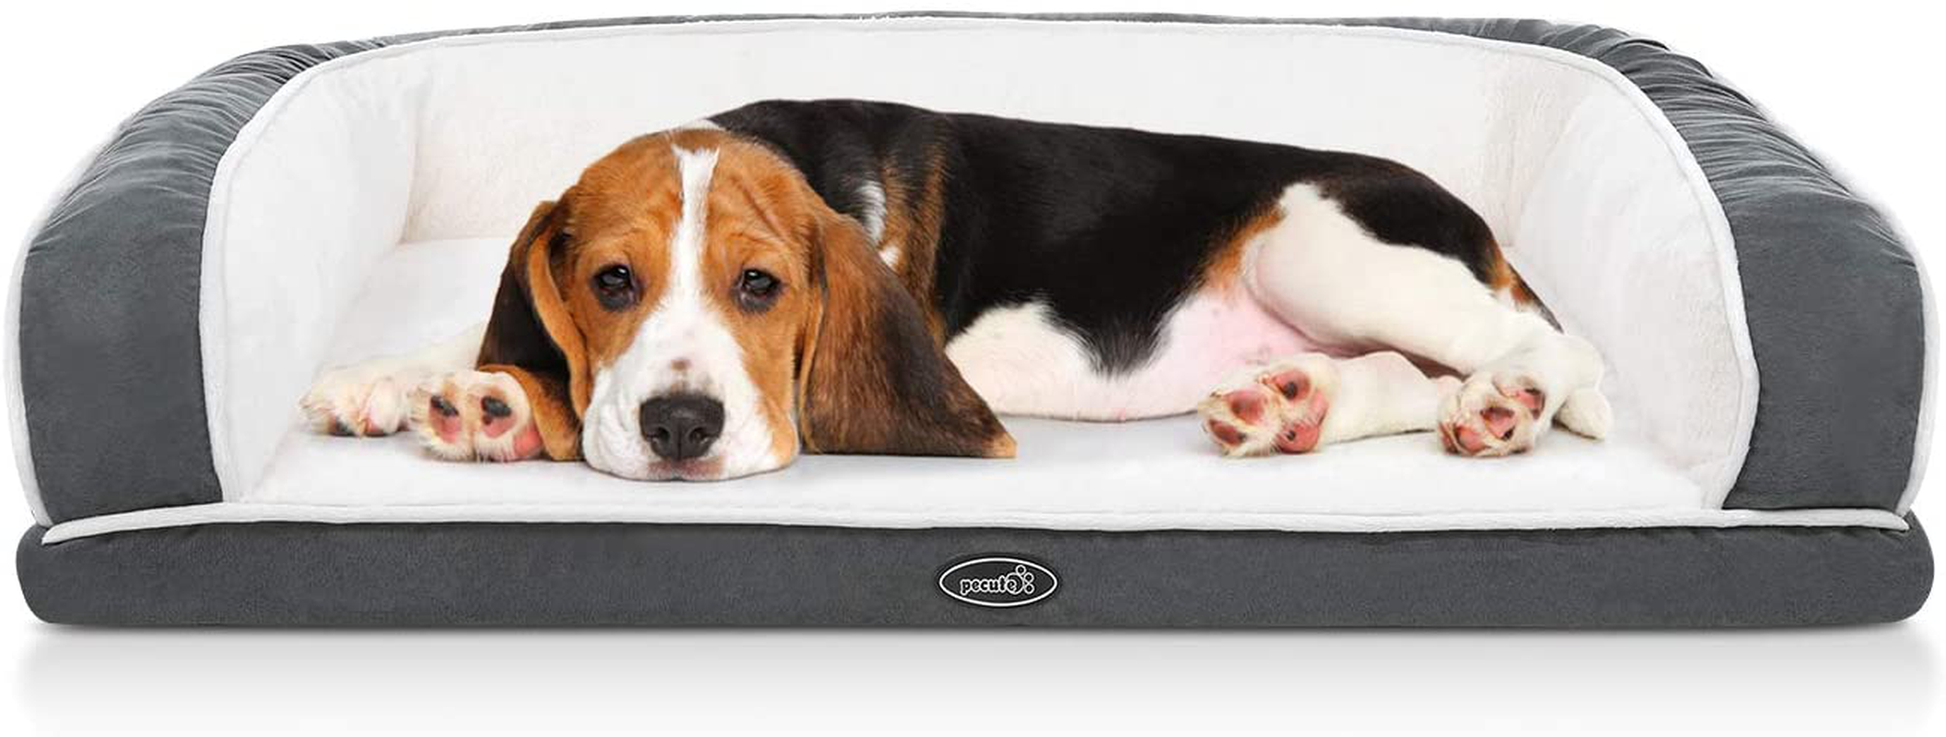 Orthopedic Pet Sofa Bed, Pecute Pillow Dog Bed with Egg Crate Foam, Plush Cat Couch Bed with Removable Washable Cover and Non-Skid Bottom, Suitable for Small Medium Large Dogs & Cats